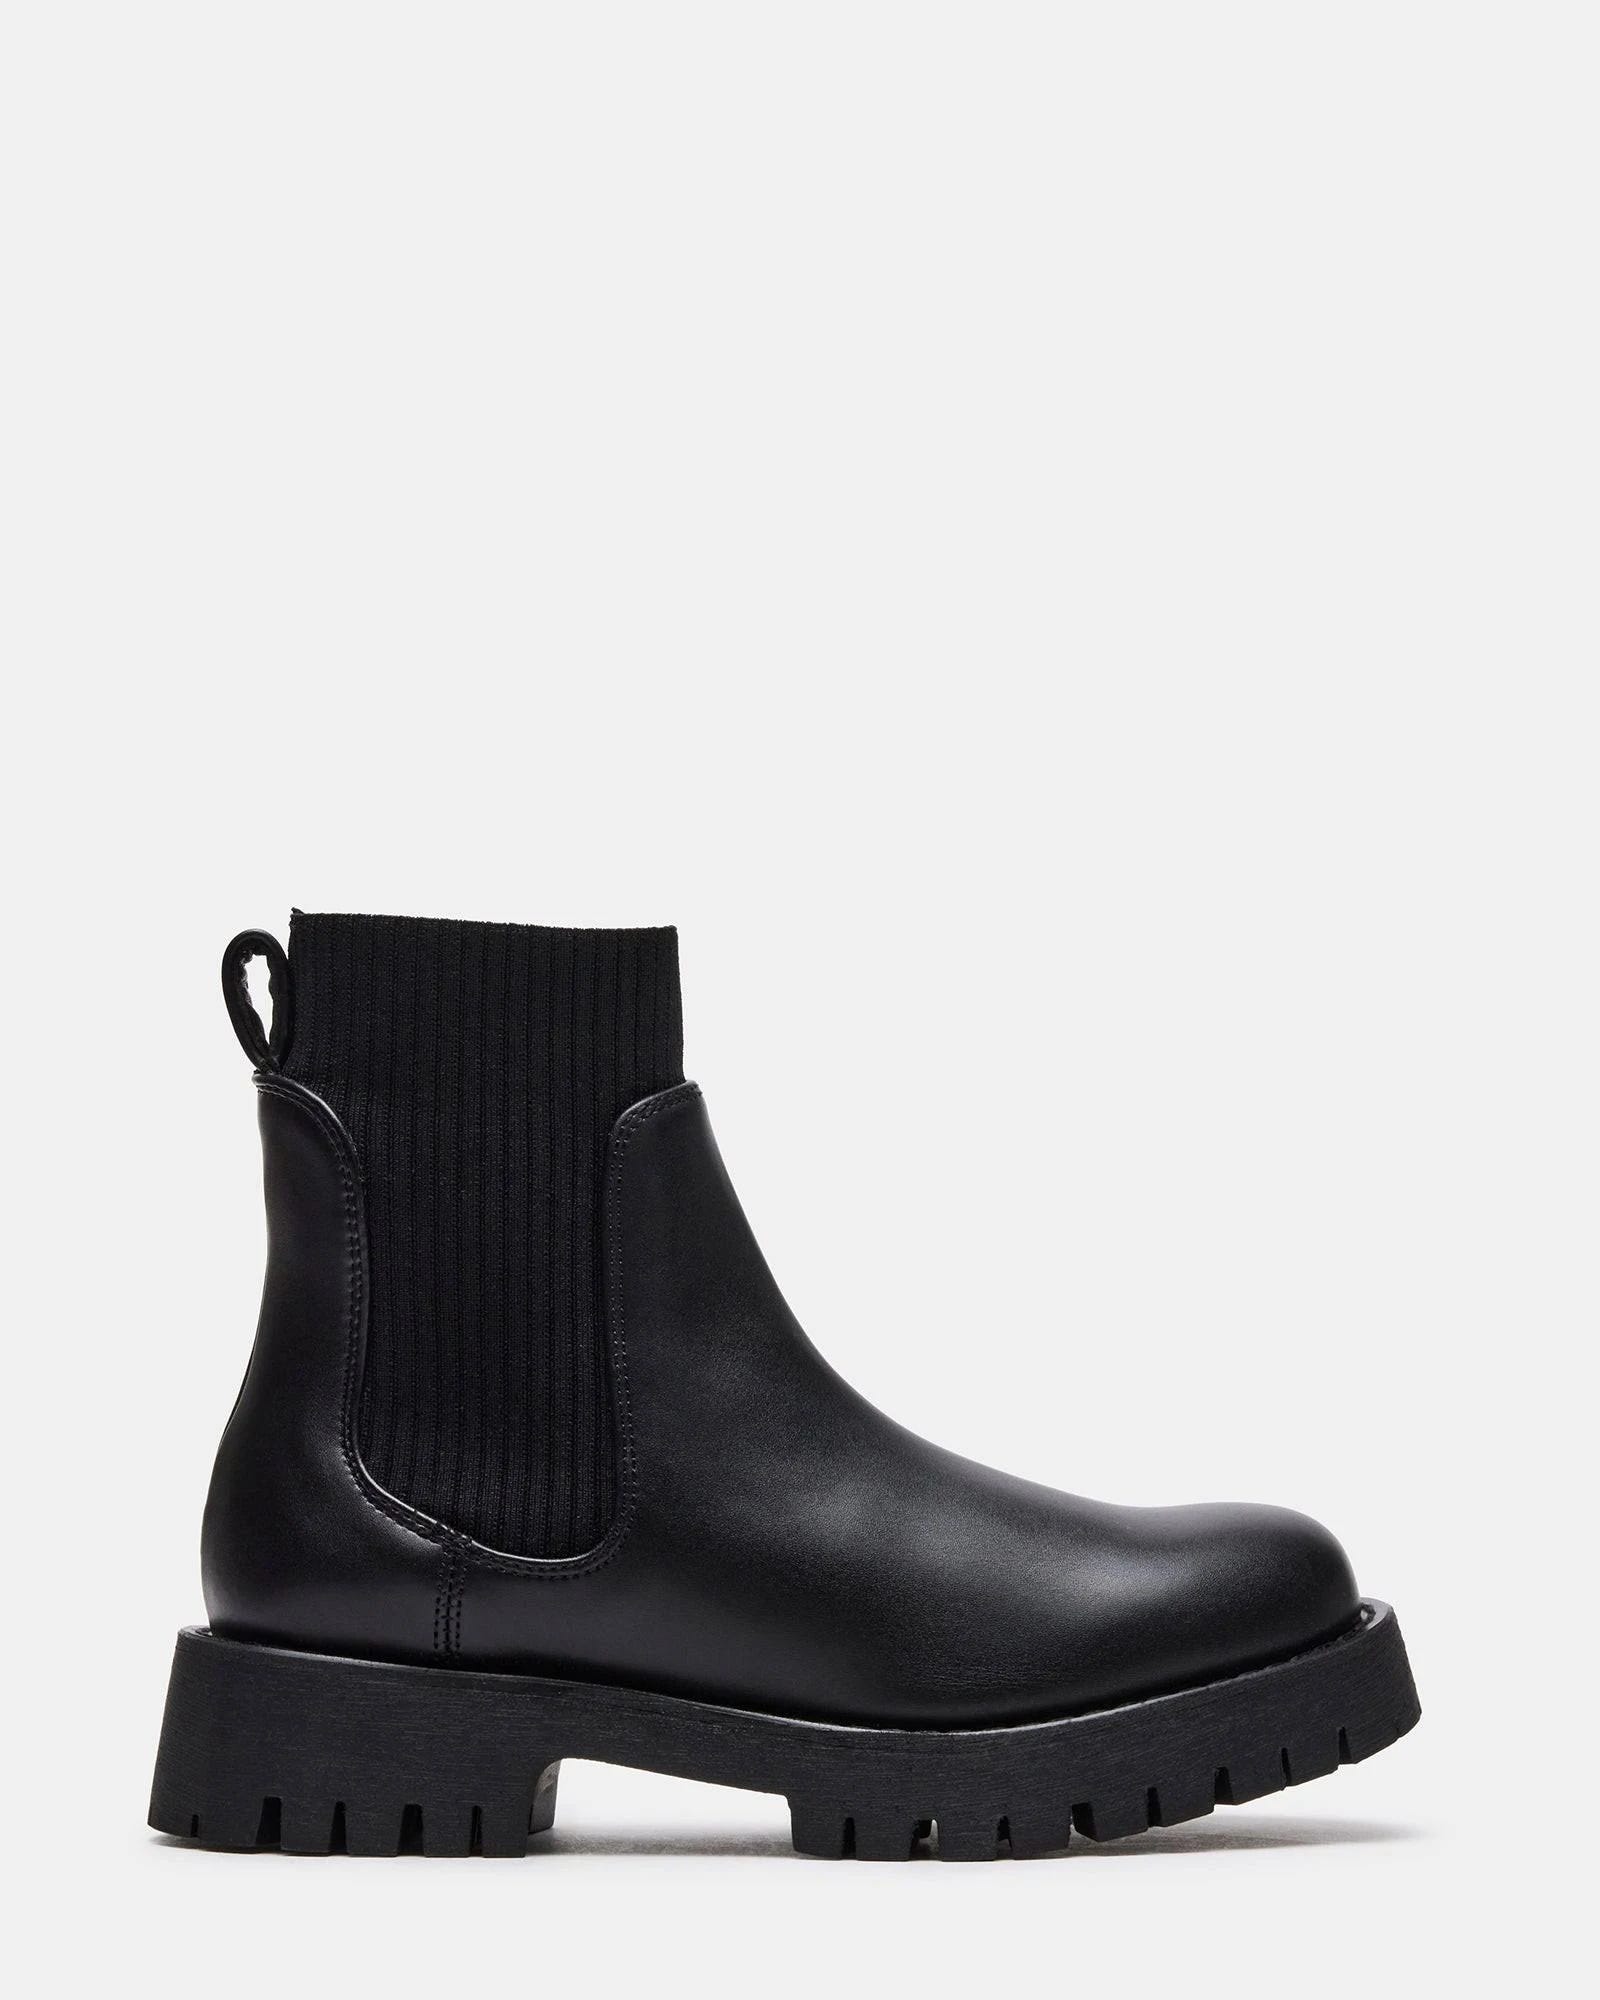 Contemporary Black Sock Bootie with Vegan Materials | Image